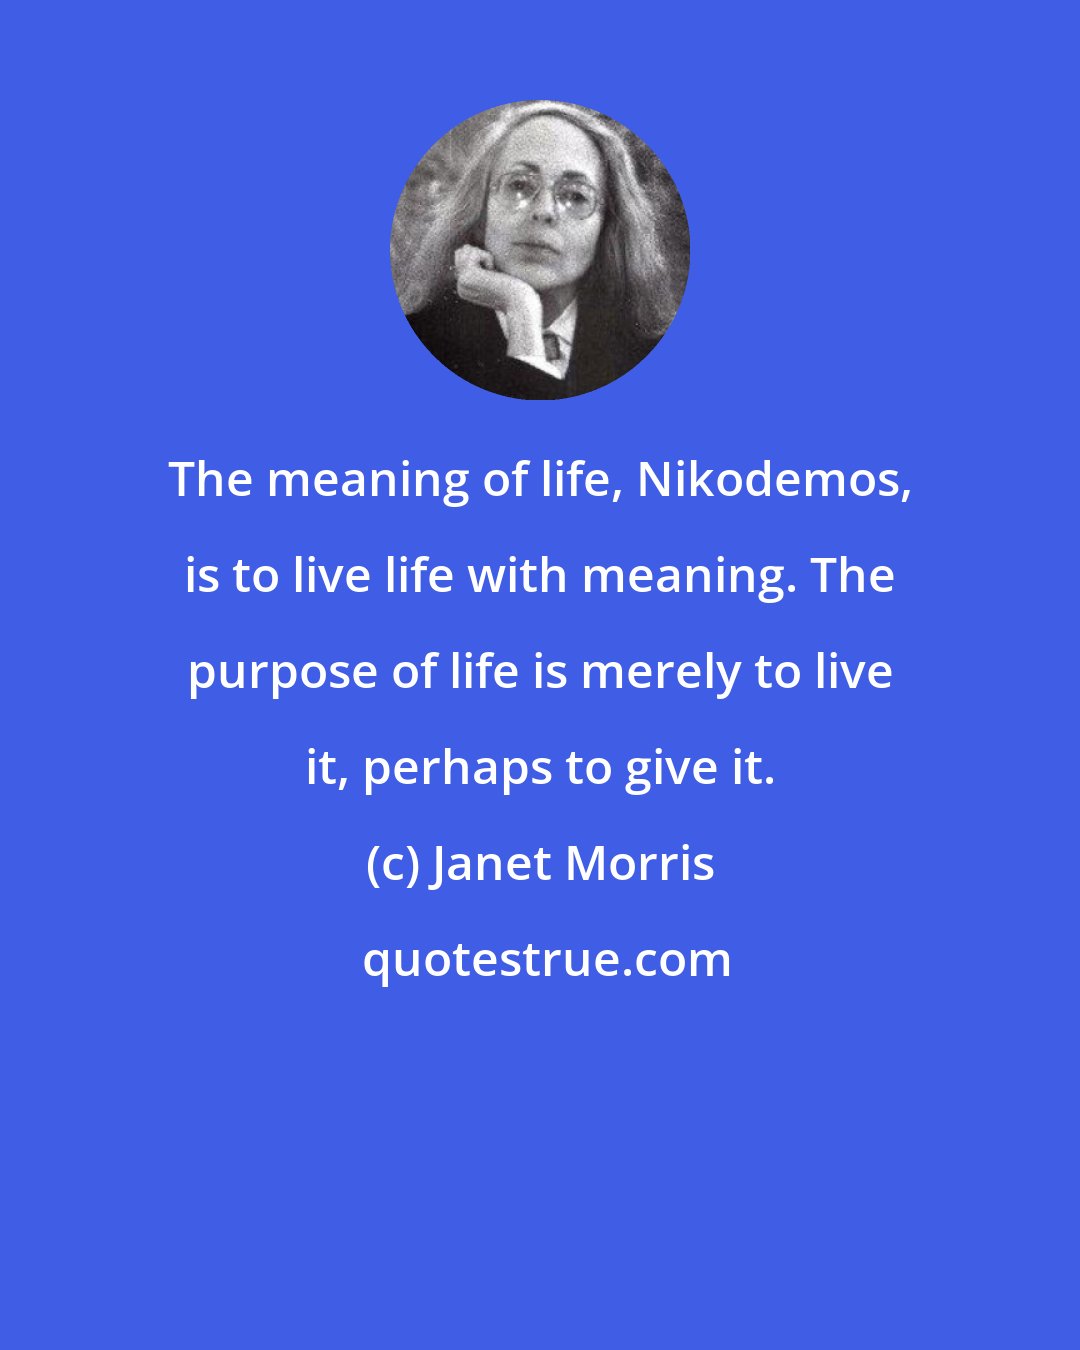 Janet Morris: The meaning of life, Nikodemos, is to live life with meaning. The purpose of life is merely to live it, perhaps to give it.